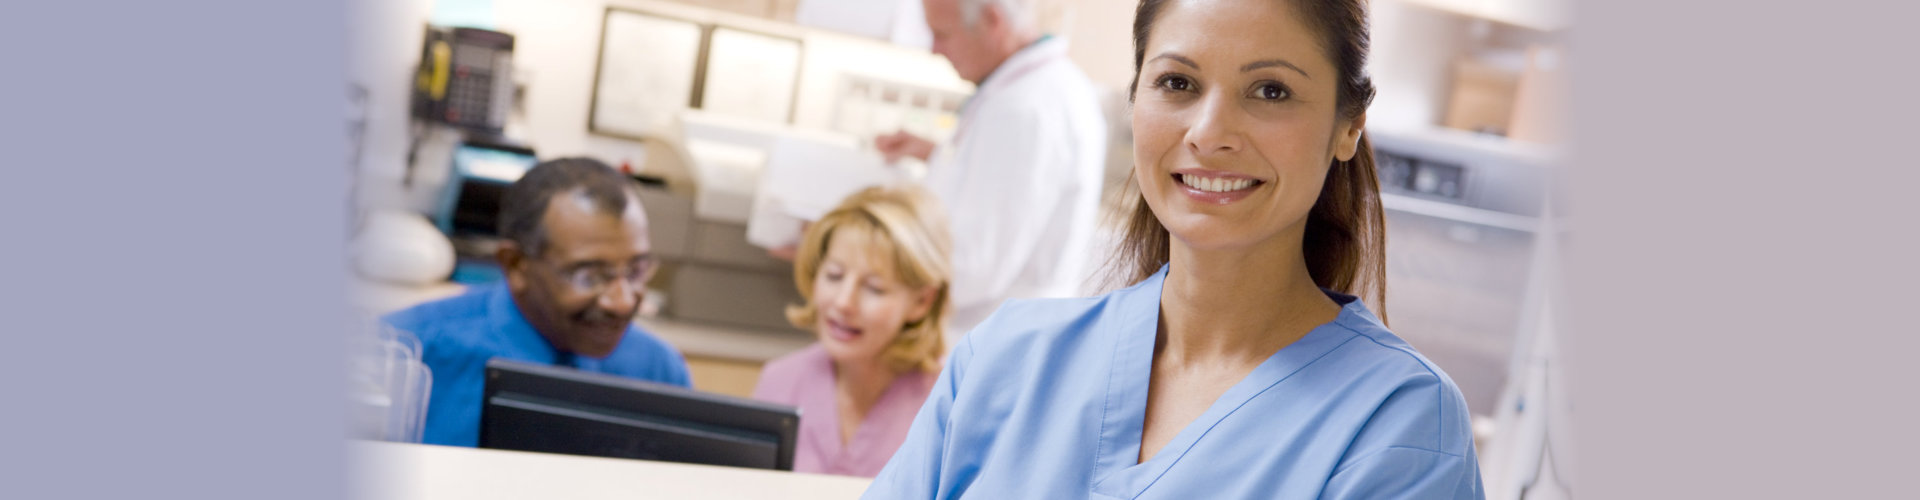 nurse standing in front of busy elderly couple